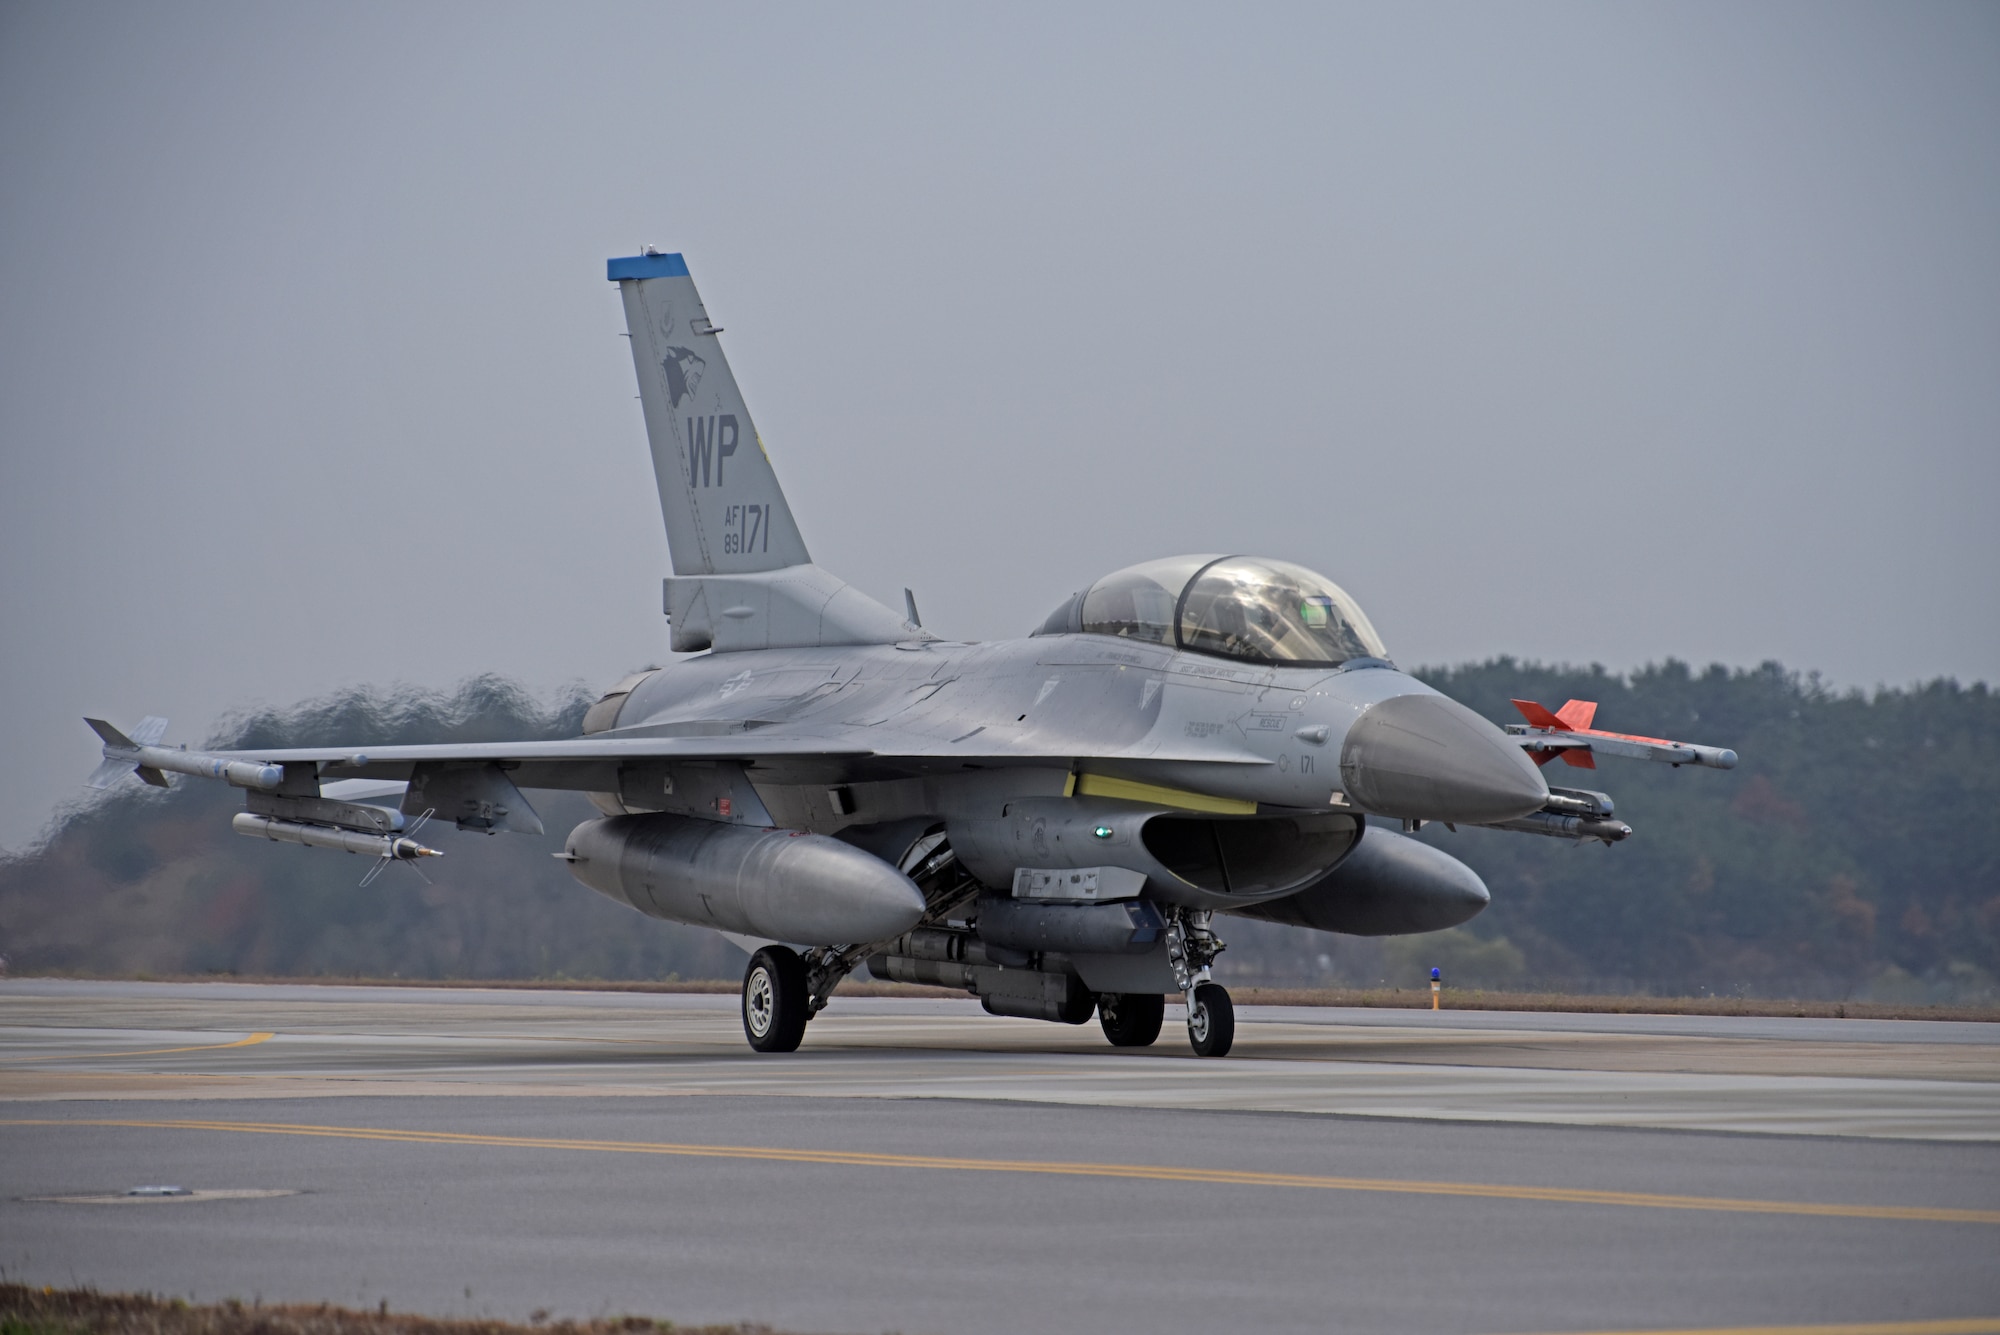 A U.S. Air Force F-16 Fighting Falcon assigned to the 35th Fighter Squadron taxis down the flightline at Kunsan Air Base, Republic of Korea, Nov. 19, 2019. The 35th FS “Pantons” perform air and space control roles including counter air, strategic attack, interdiction and close-air support missions. (U.S. Air Force photo by Staff Sgt. Mackenzie Mendez)